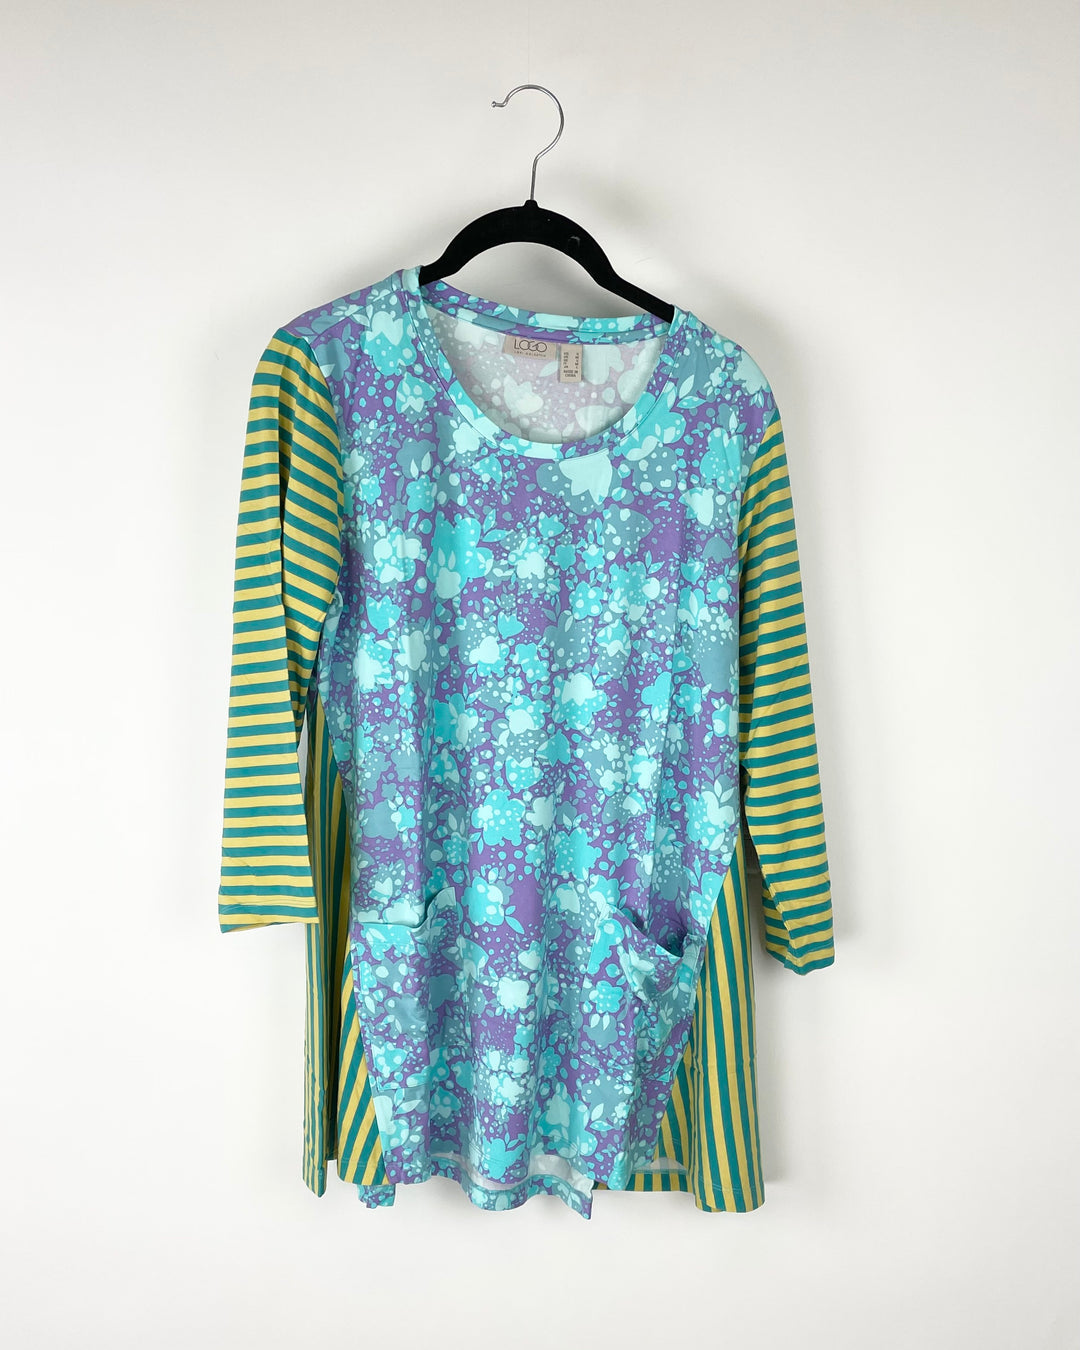 Blue Floral Top With Striped Sleeves - Small